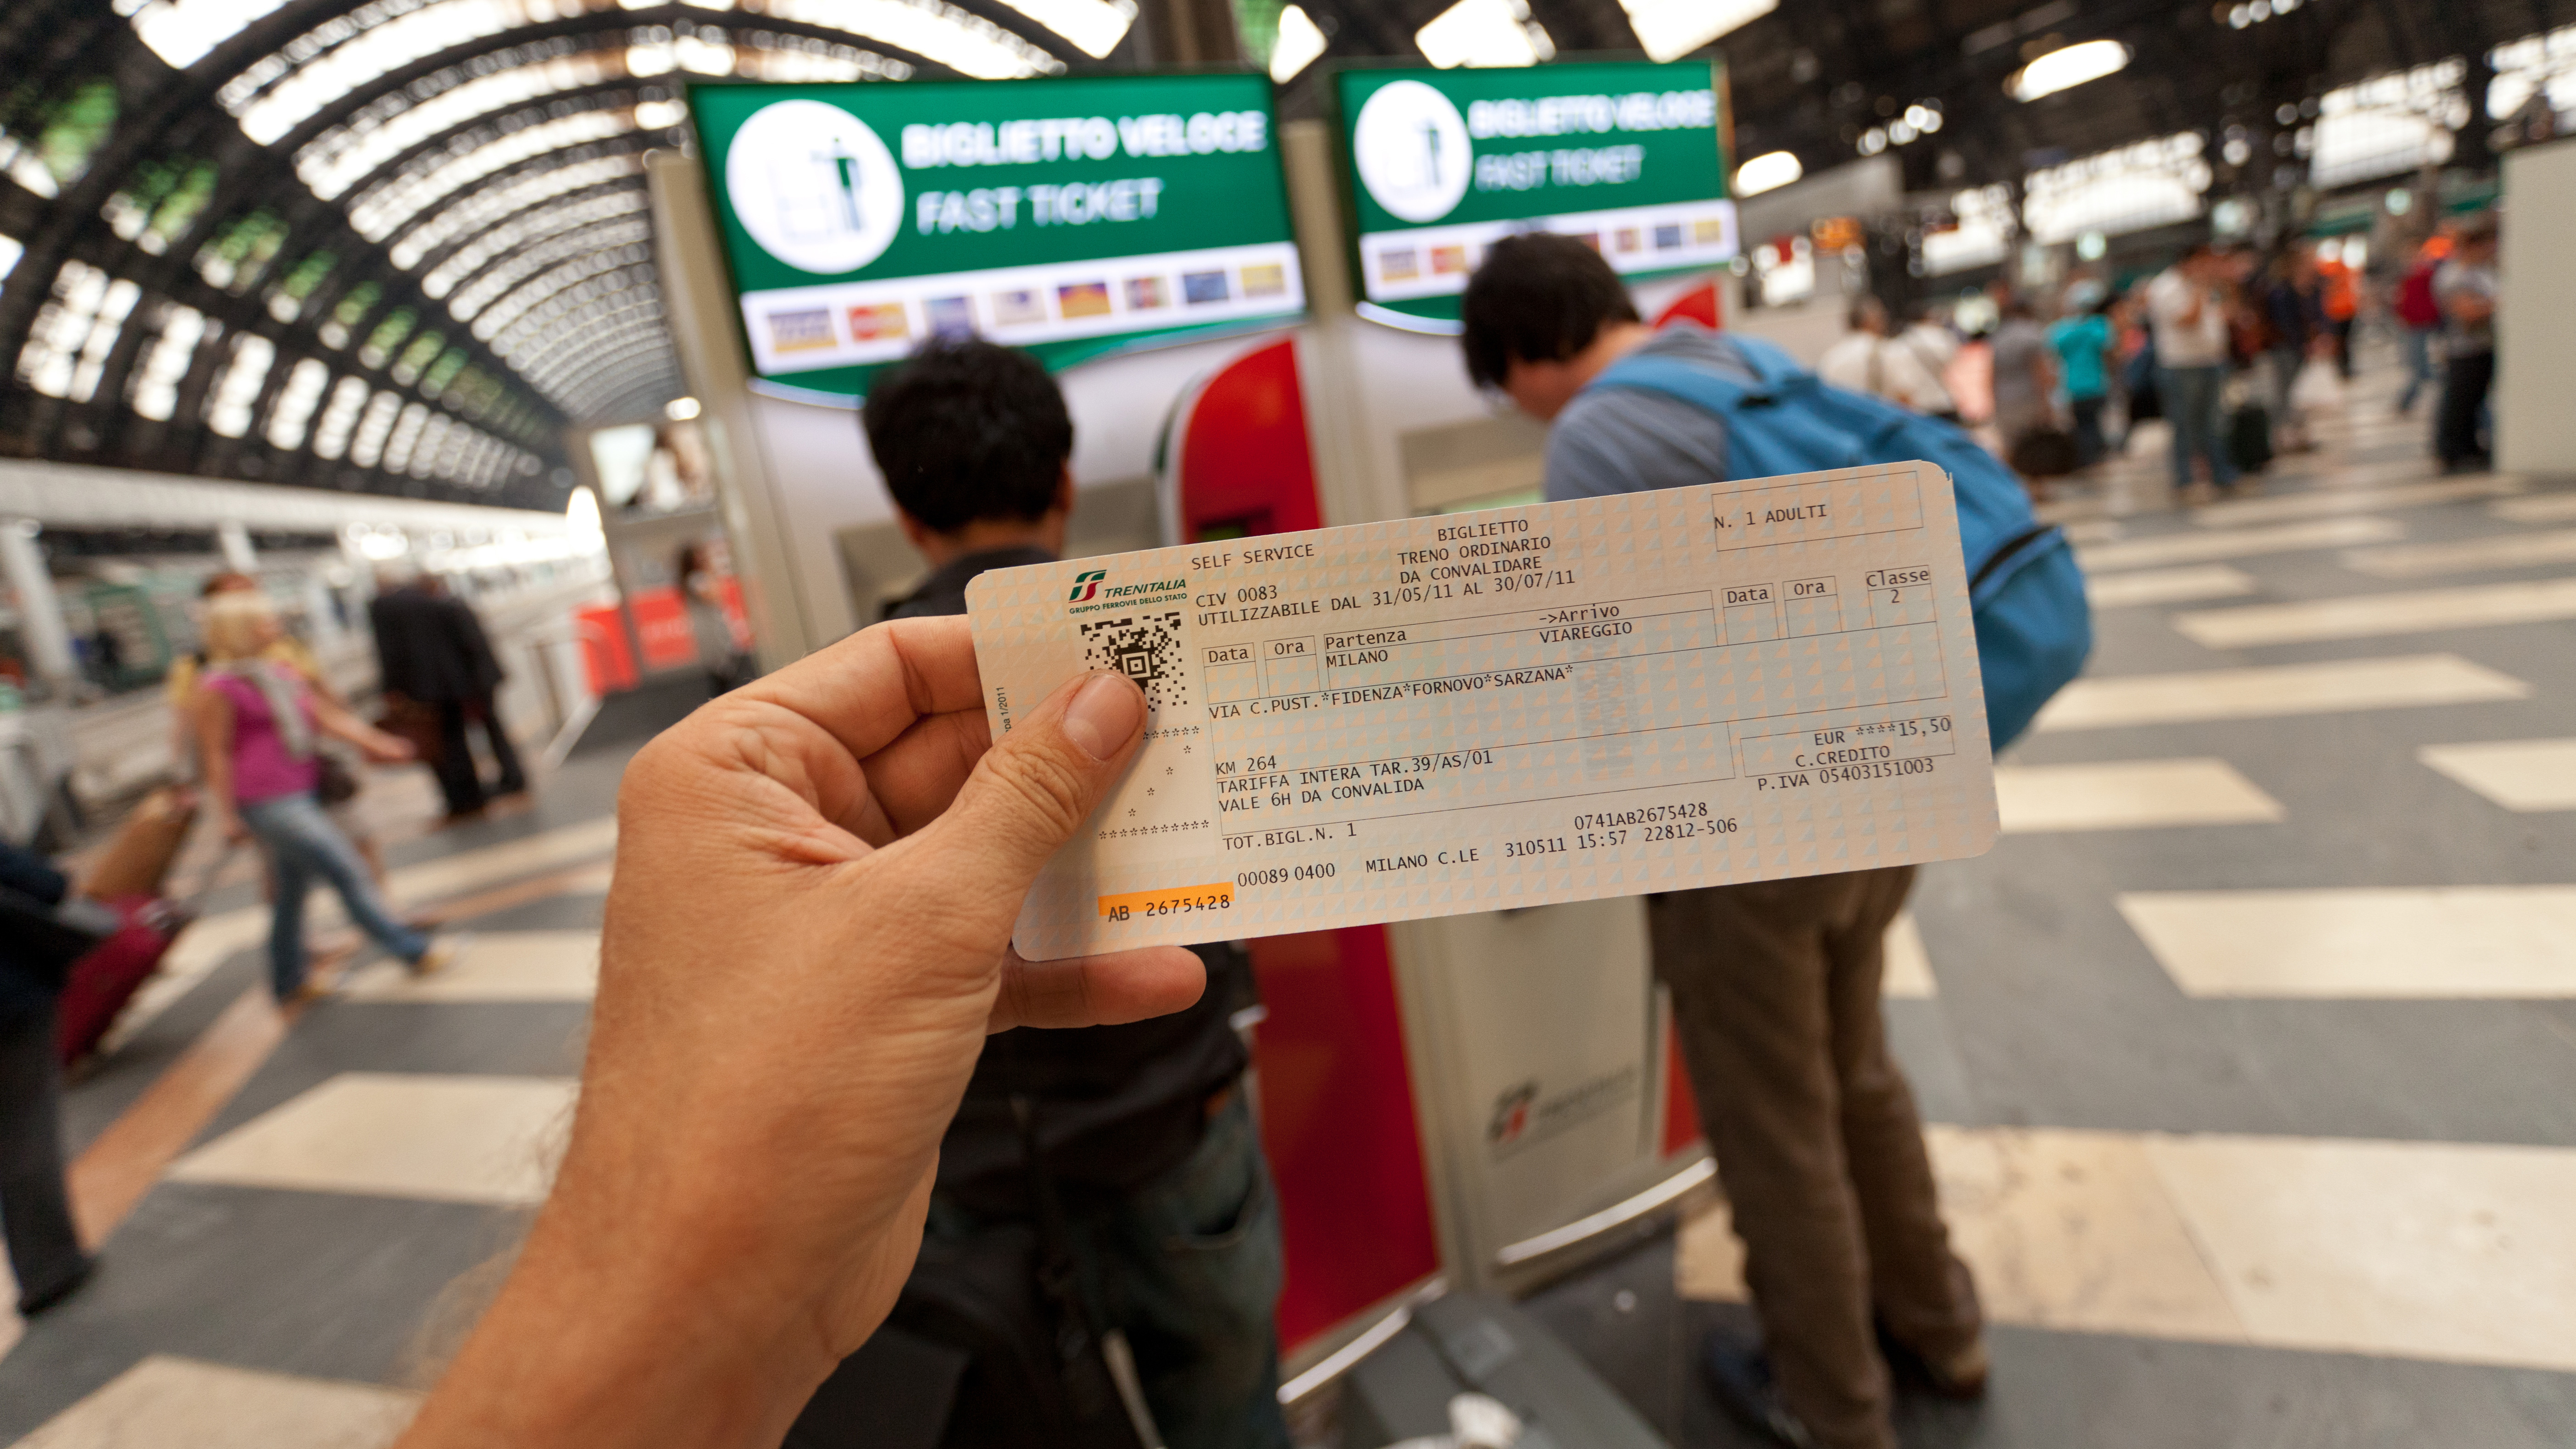 Train tickets in Europe - Search & Book on Rail Europe